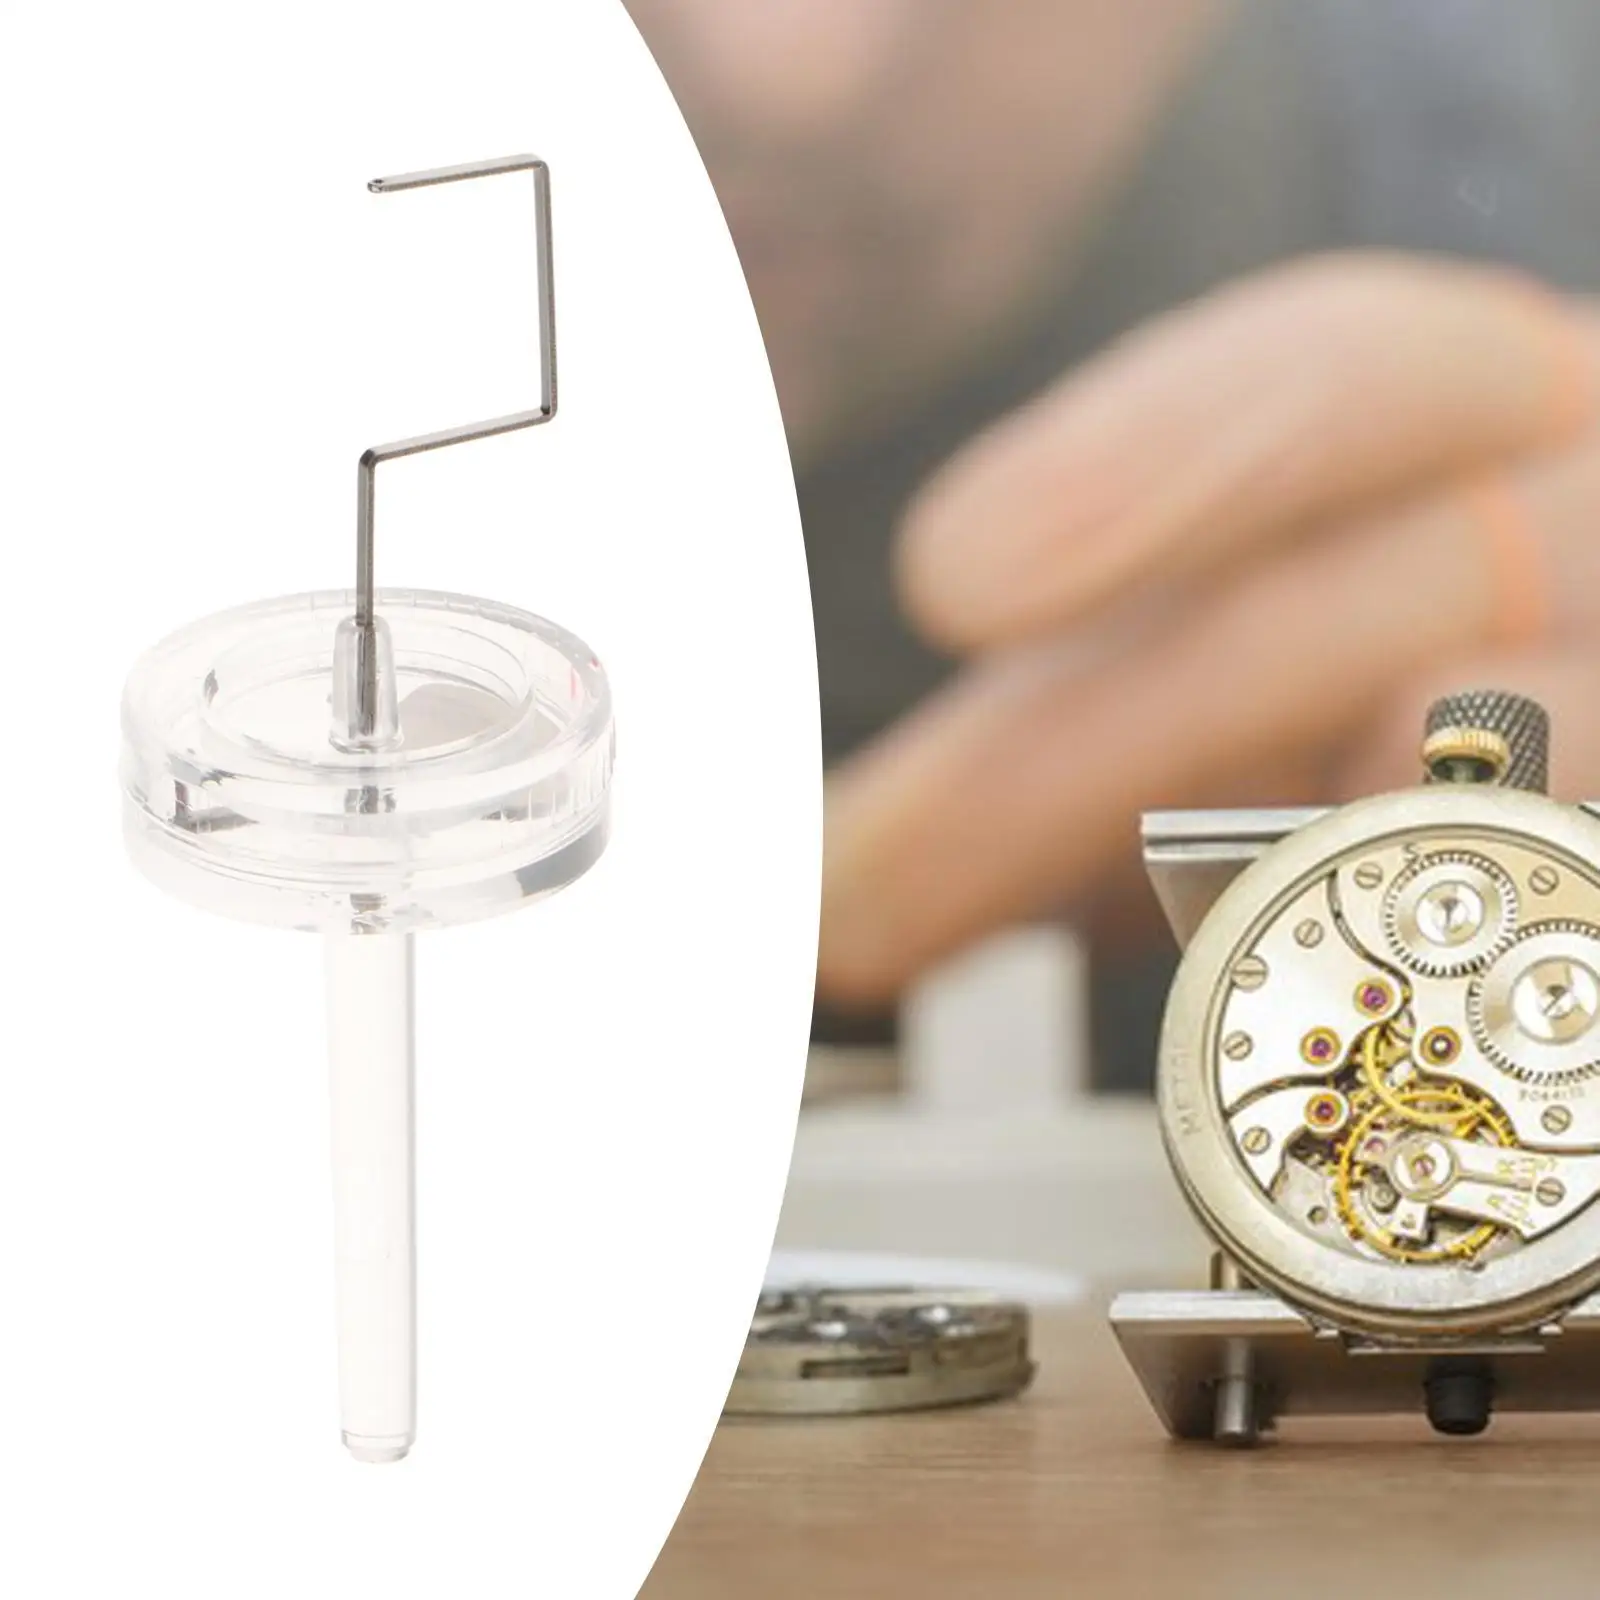 watch-movement-balance-wheelwatch-repair-tool-maintenance-with-storage-box-watchmaker-tool-for-jewellery-professionalsshop